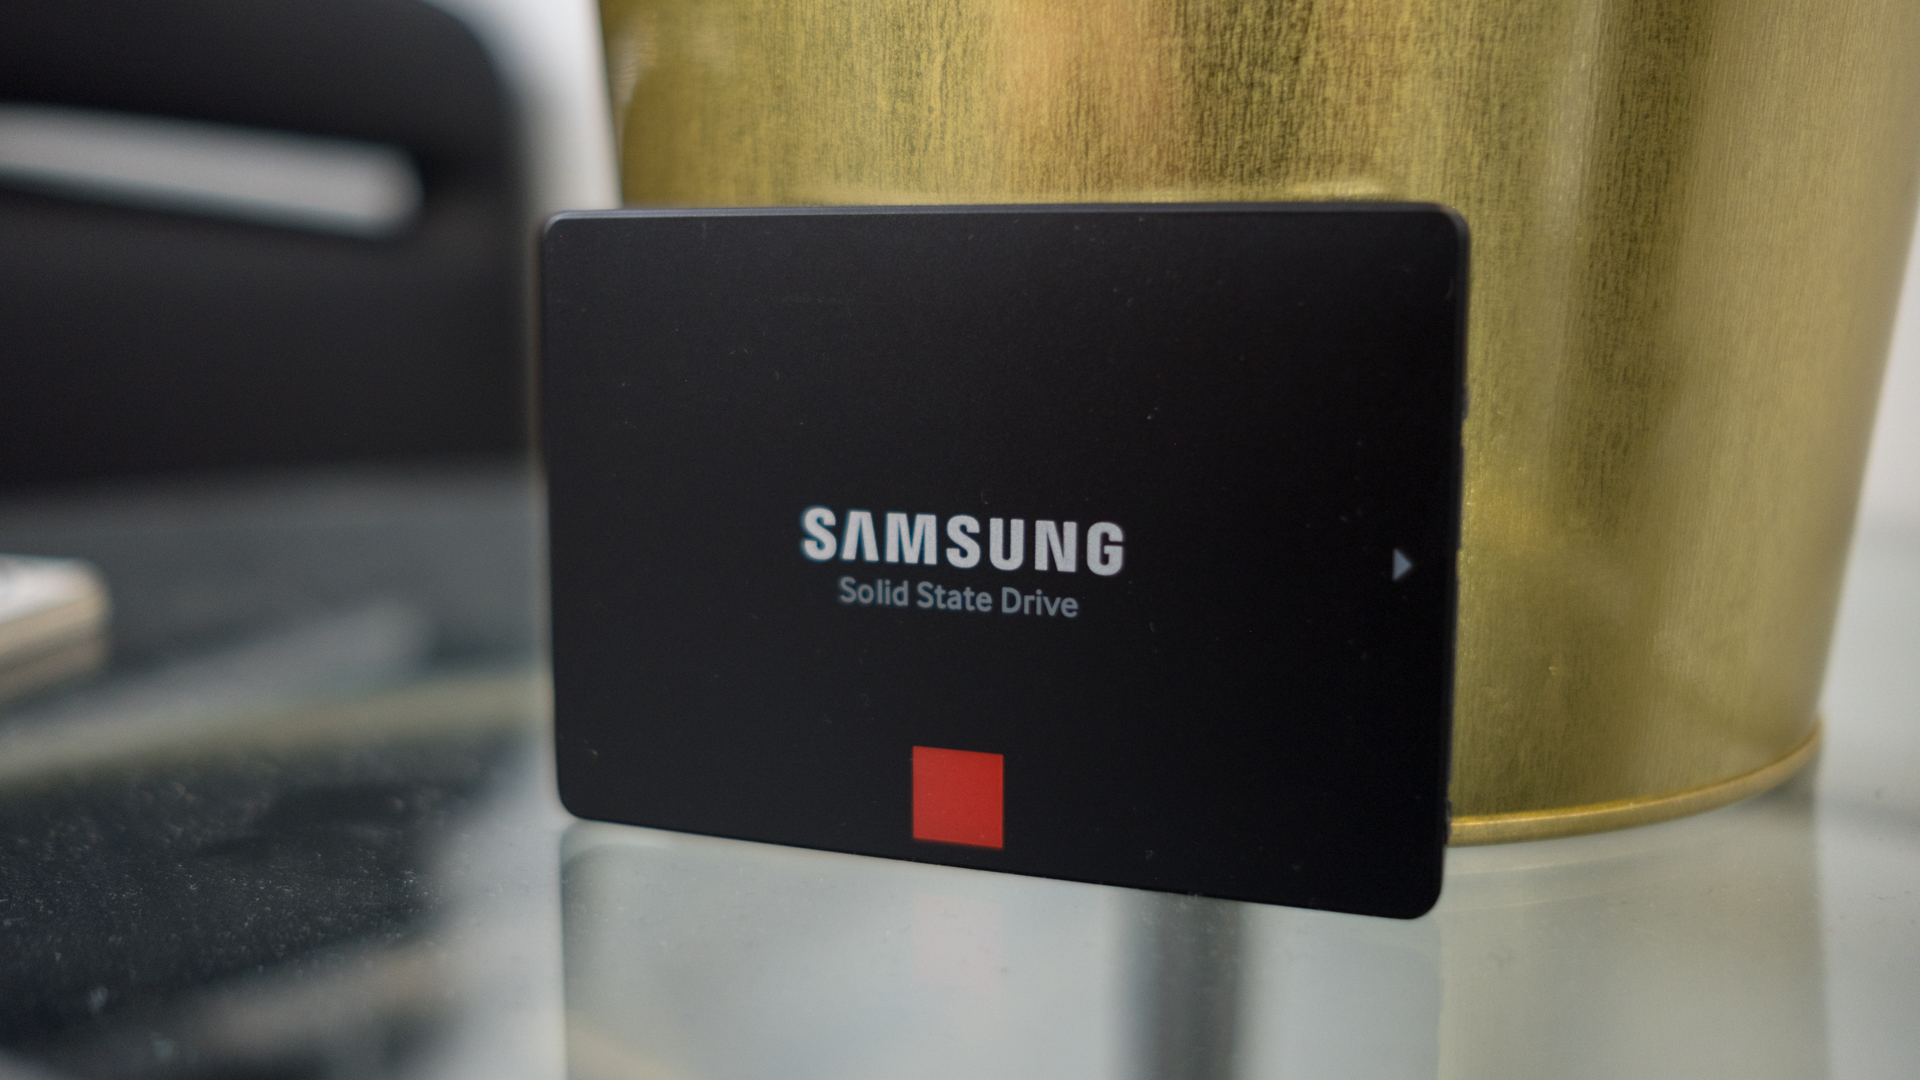 Samsung 860 Pro SSD Review